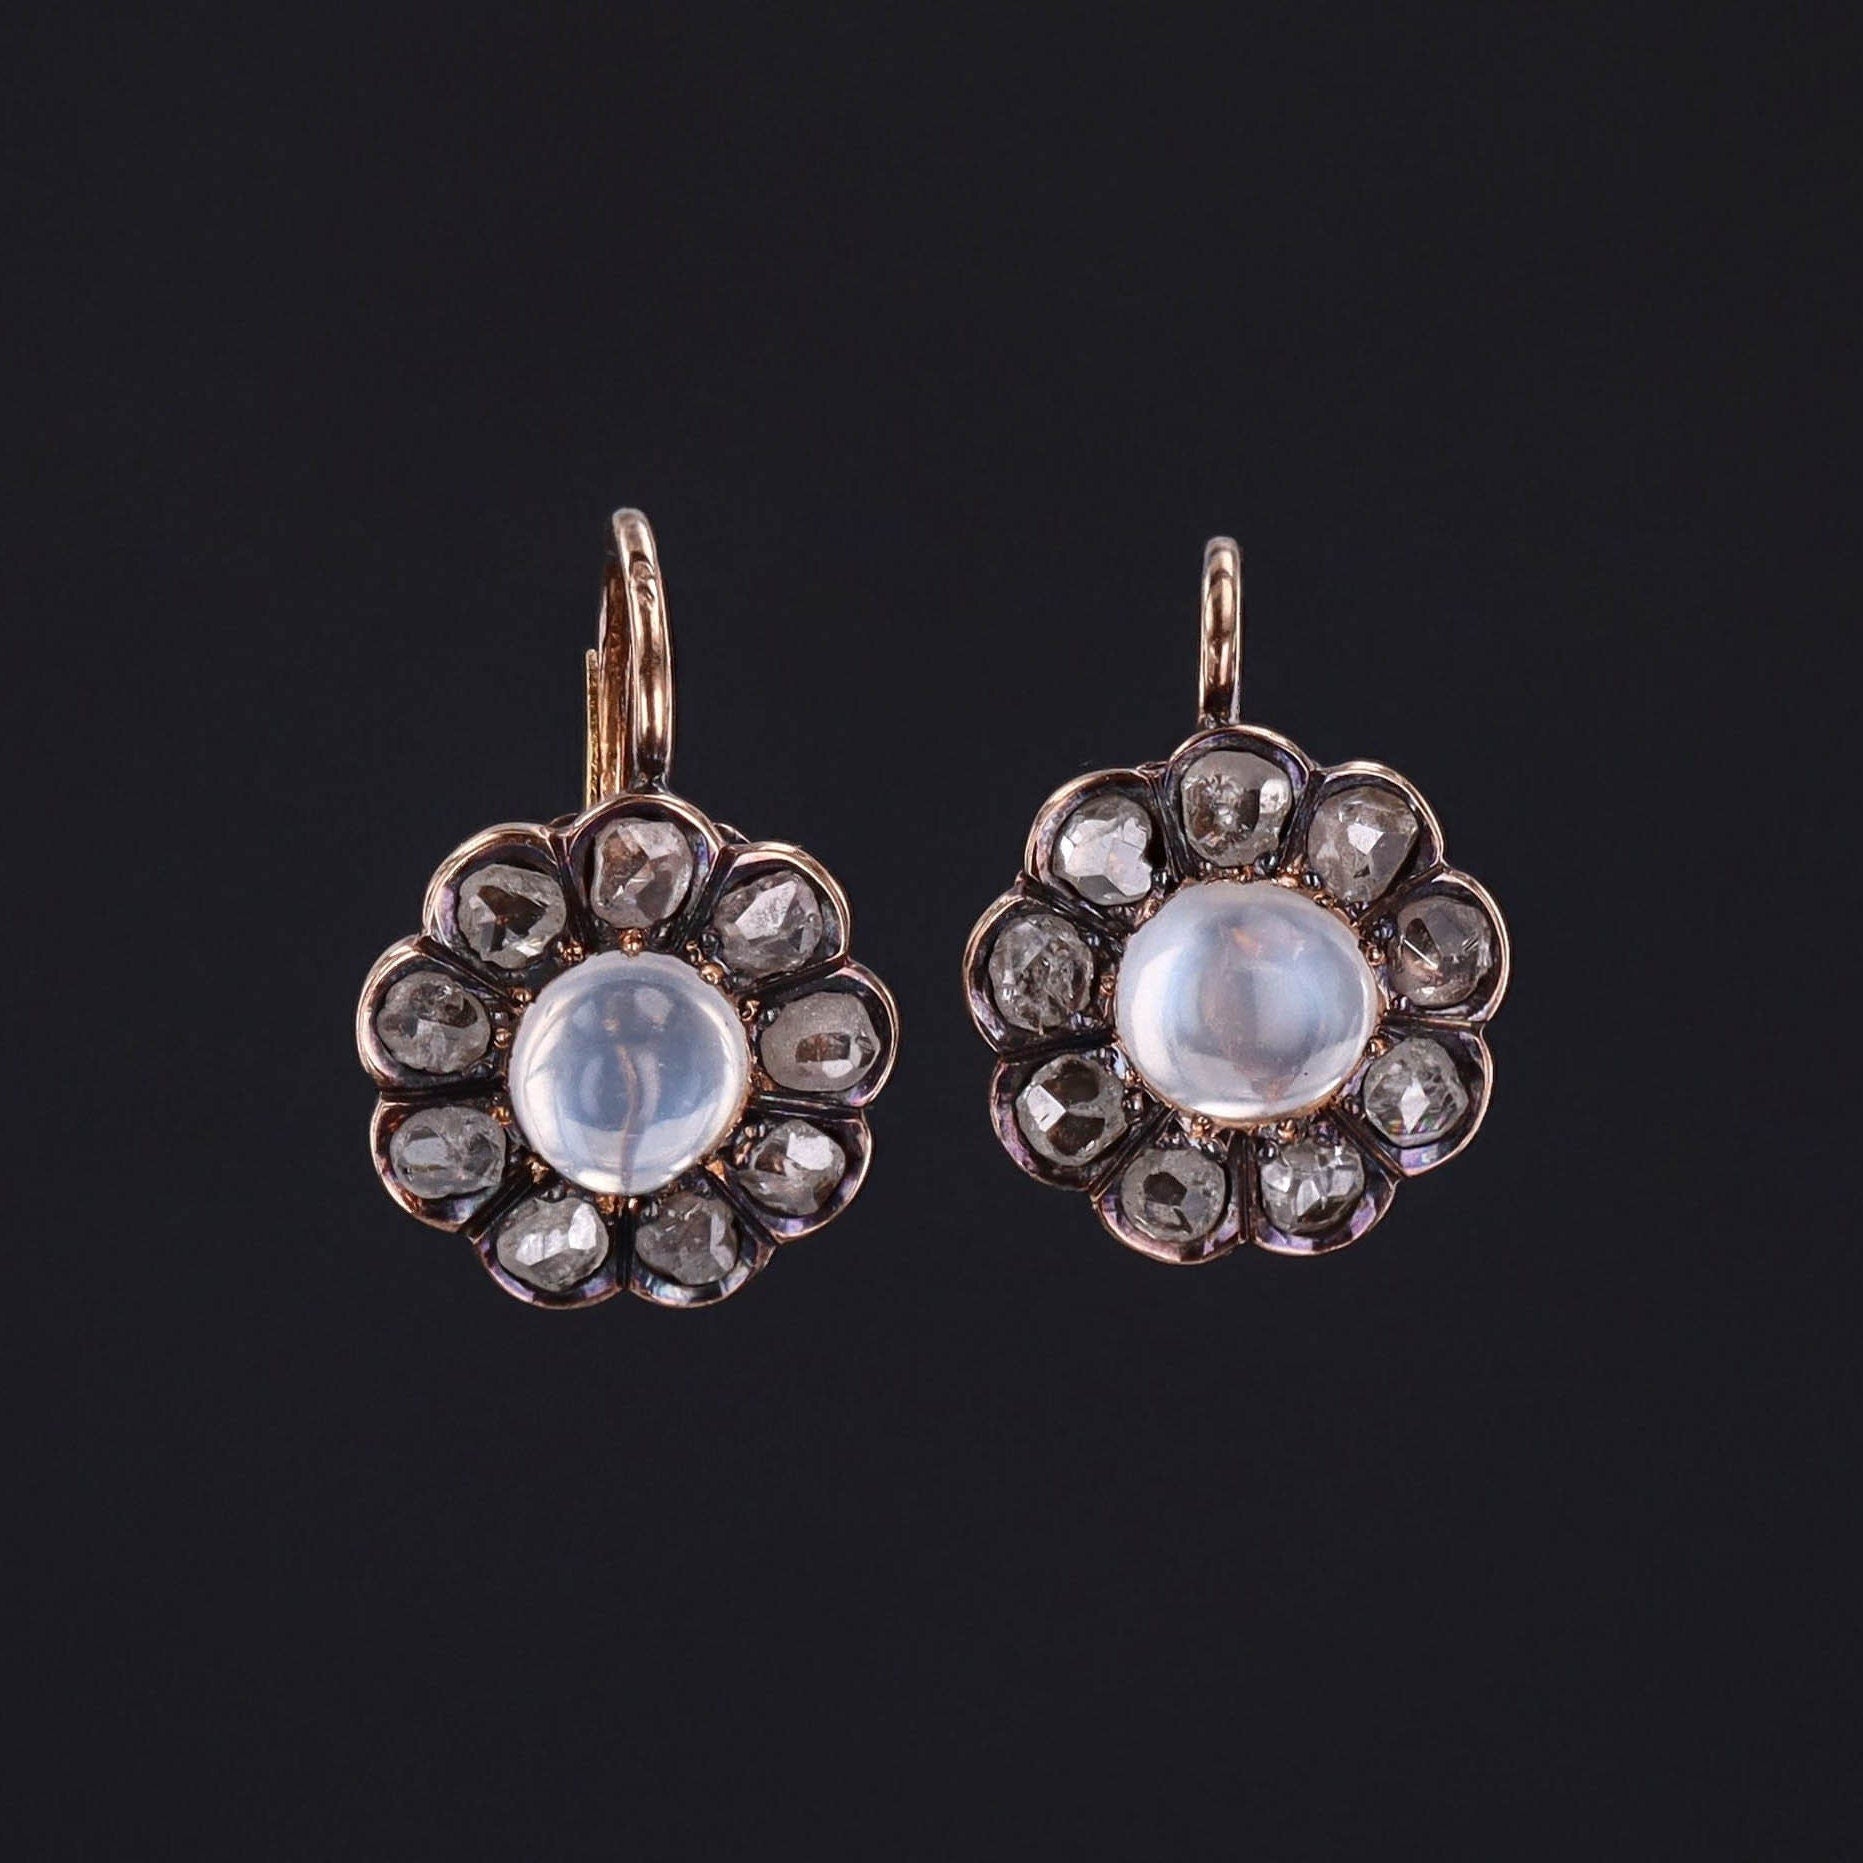 Antique Moonstone and Diamond Earrings of 14k Gold